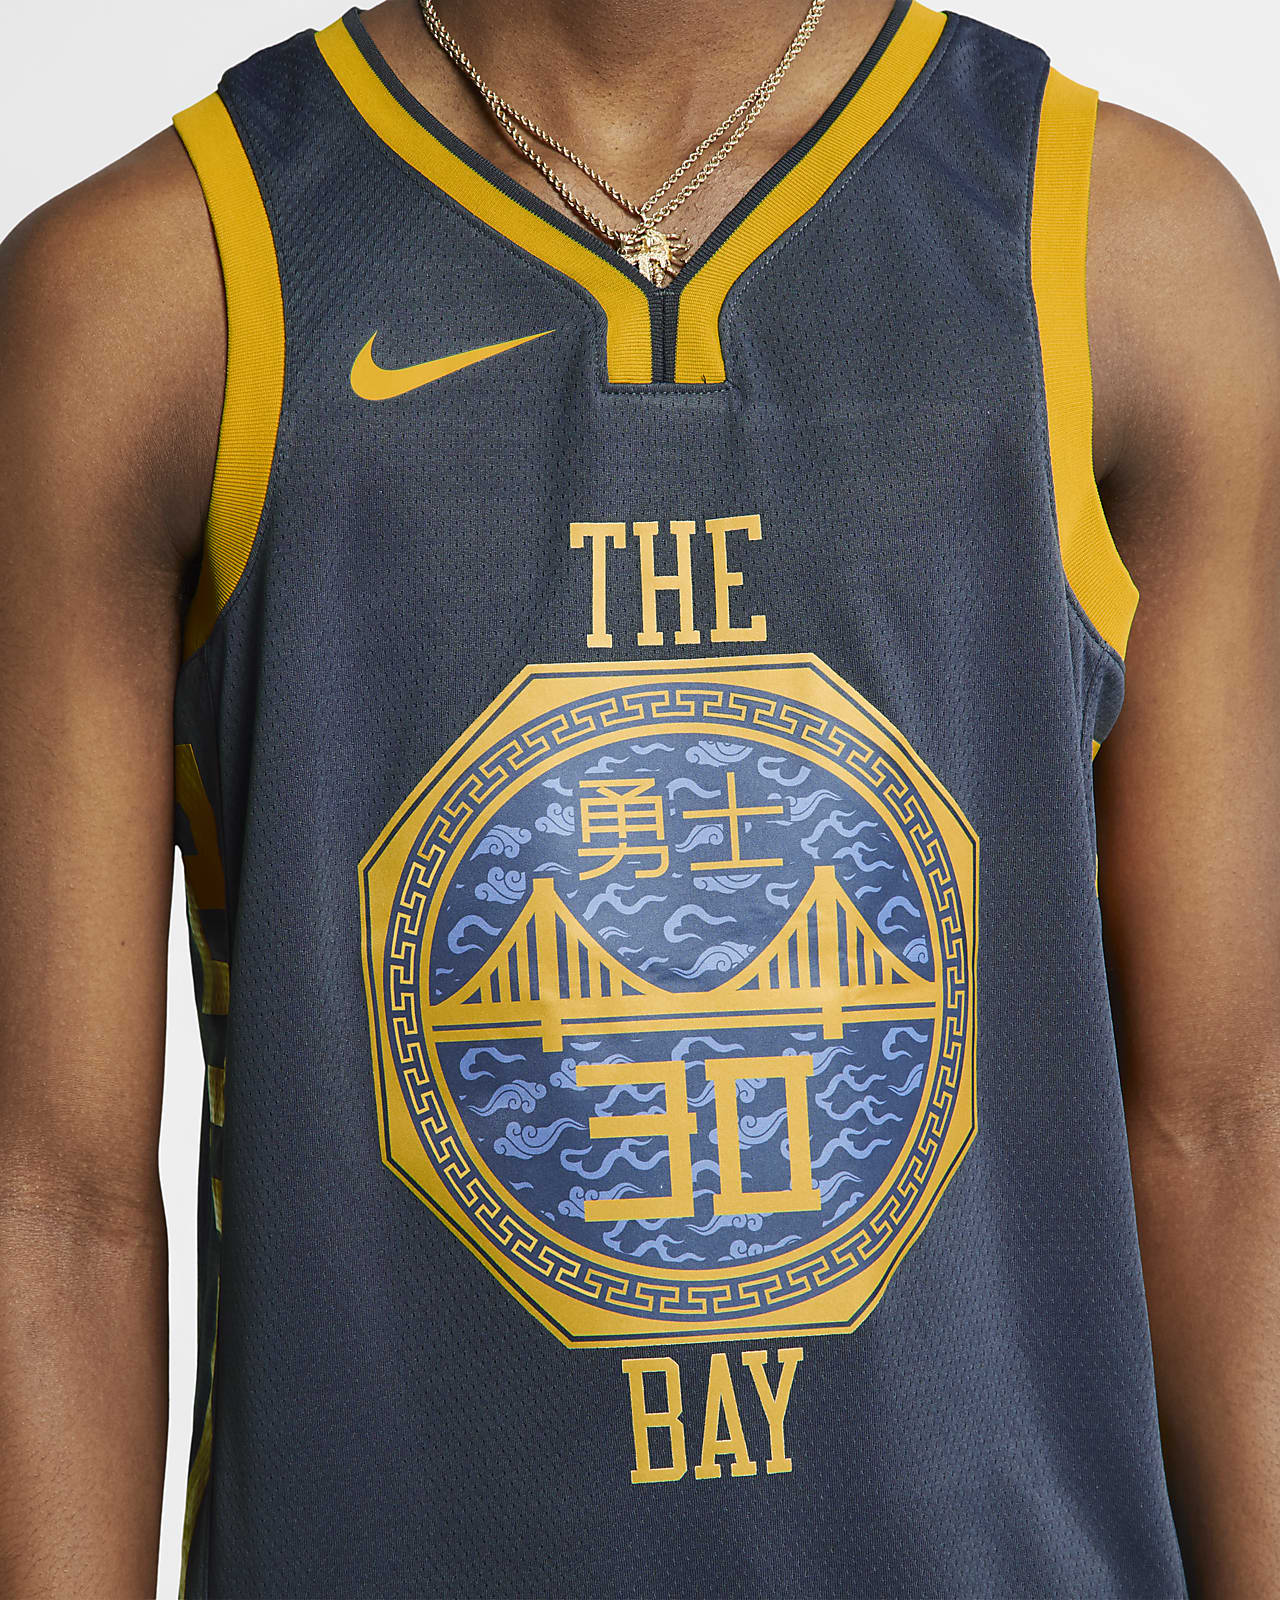 golden state city edition jersey